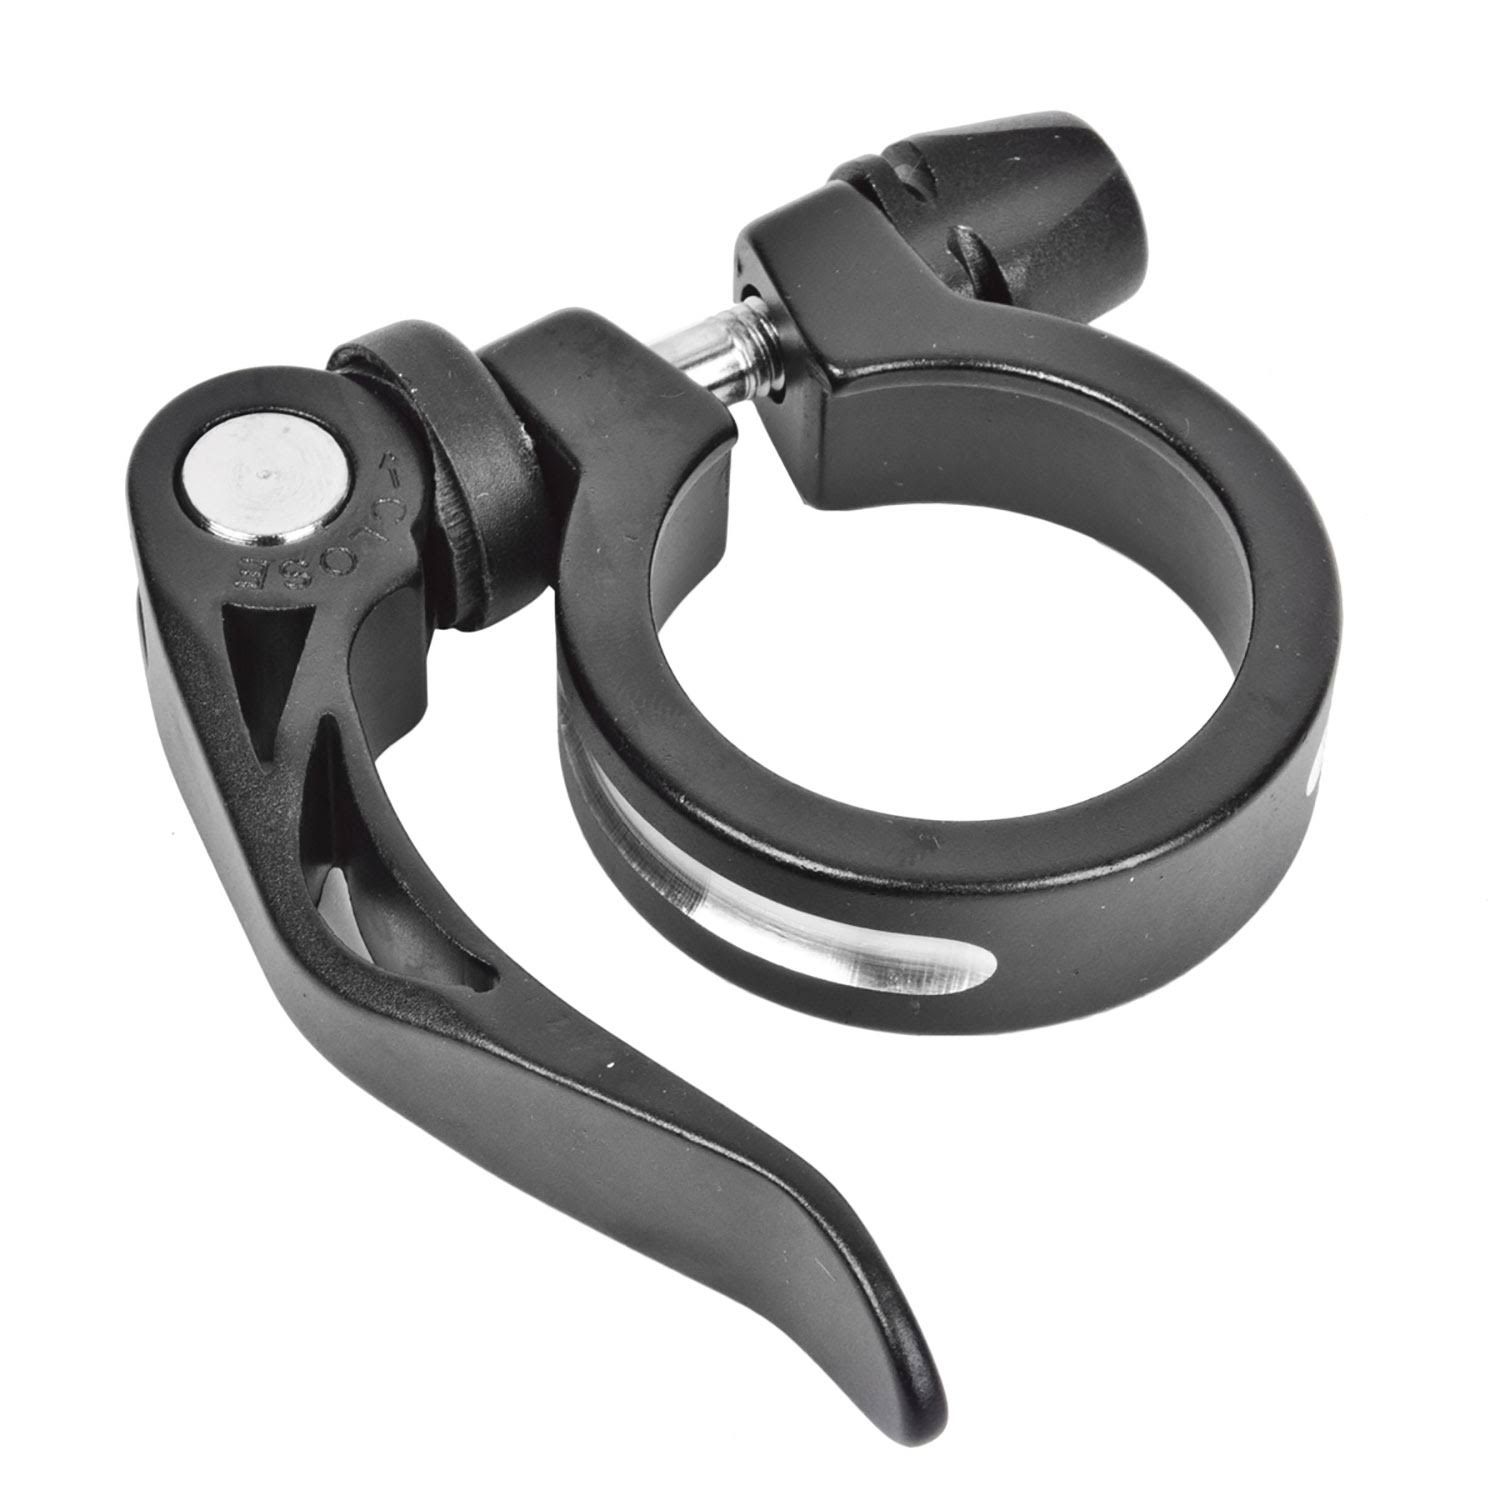 Sunlite Bicycle Quick Release Seat Clamp - 34.9mm, Black